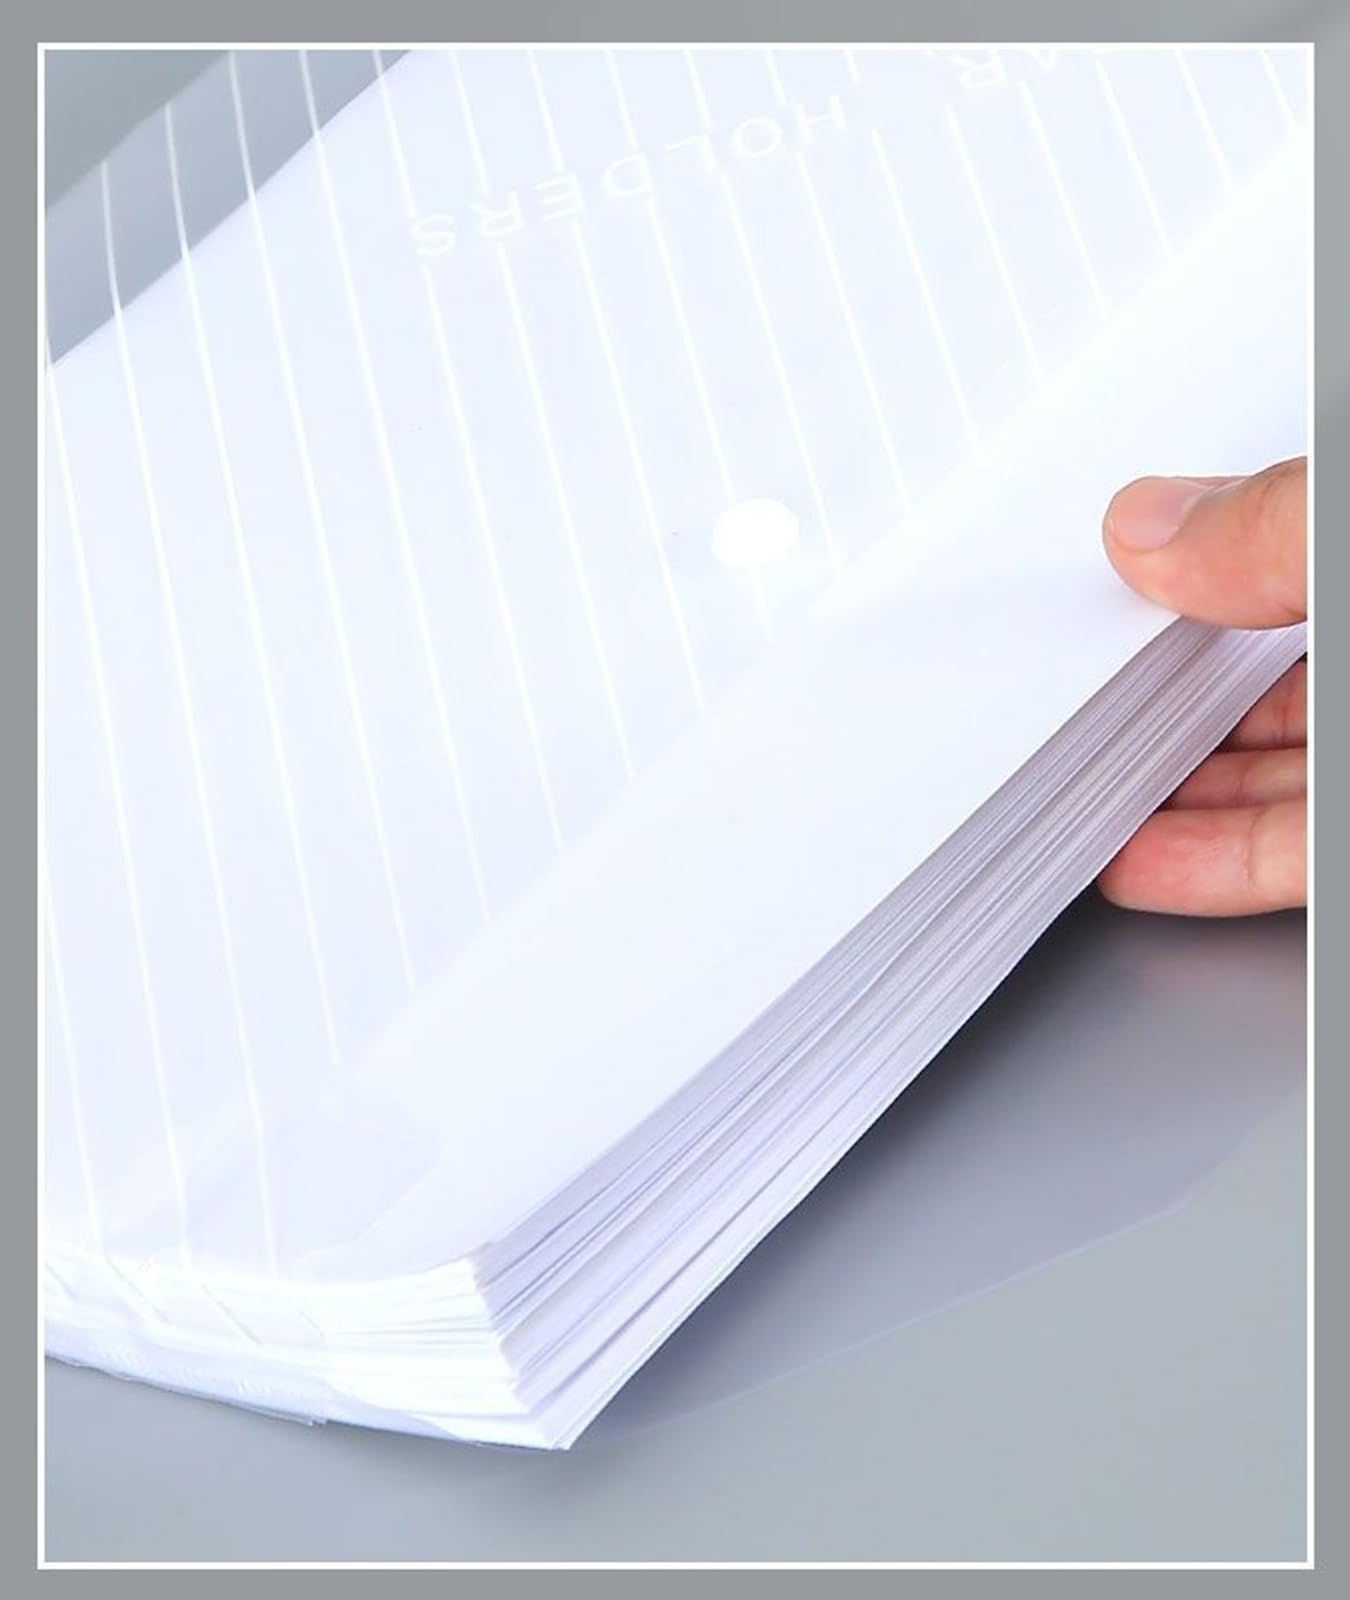 AJIODA 15pcs Clear Plastic Envelopes, Clear Folders with Snap Closure Document Folders Letter Size A4 Size File Envelopes Poly File Folders for School Home Work Office Organization, Twill